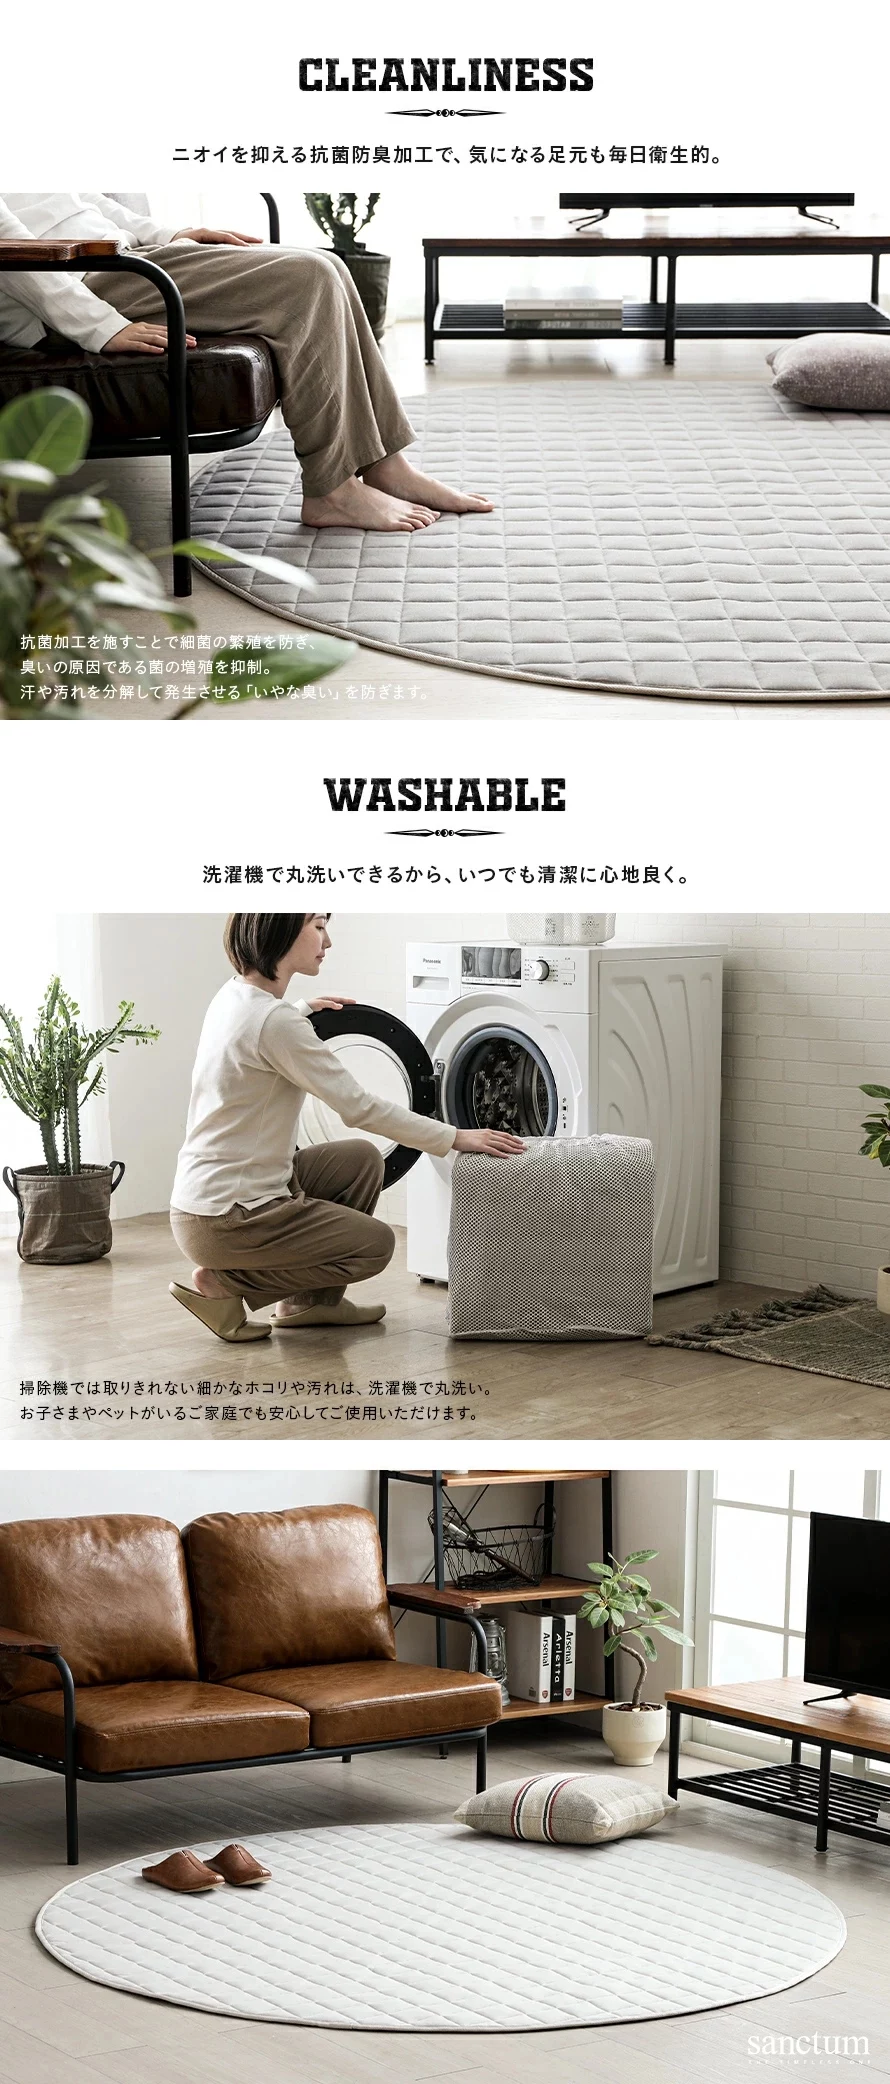 CLEANLINESS、WASHABLE